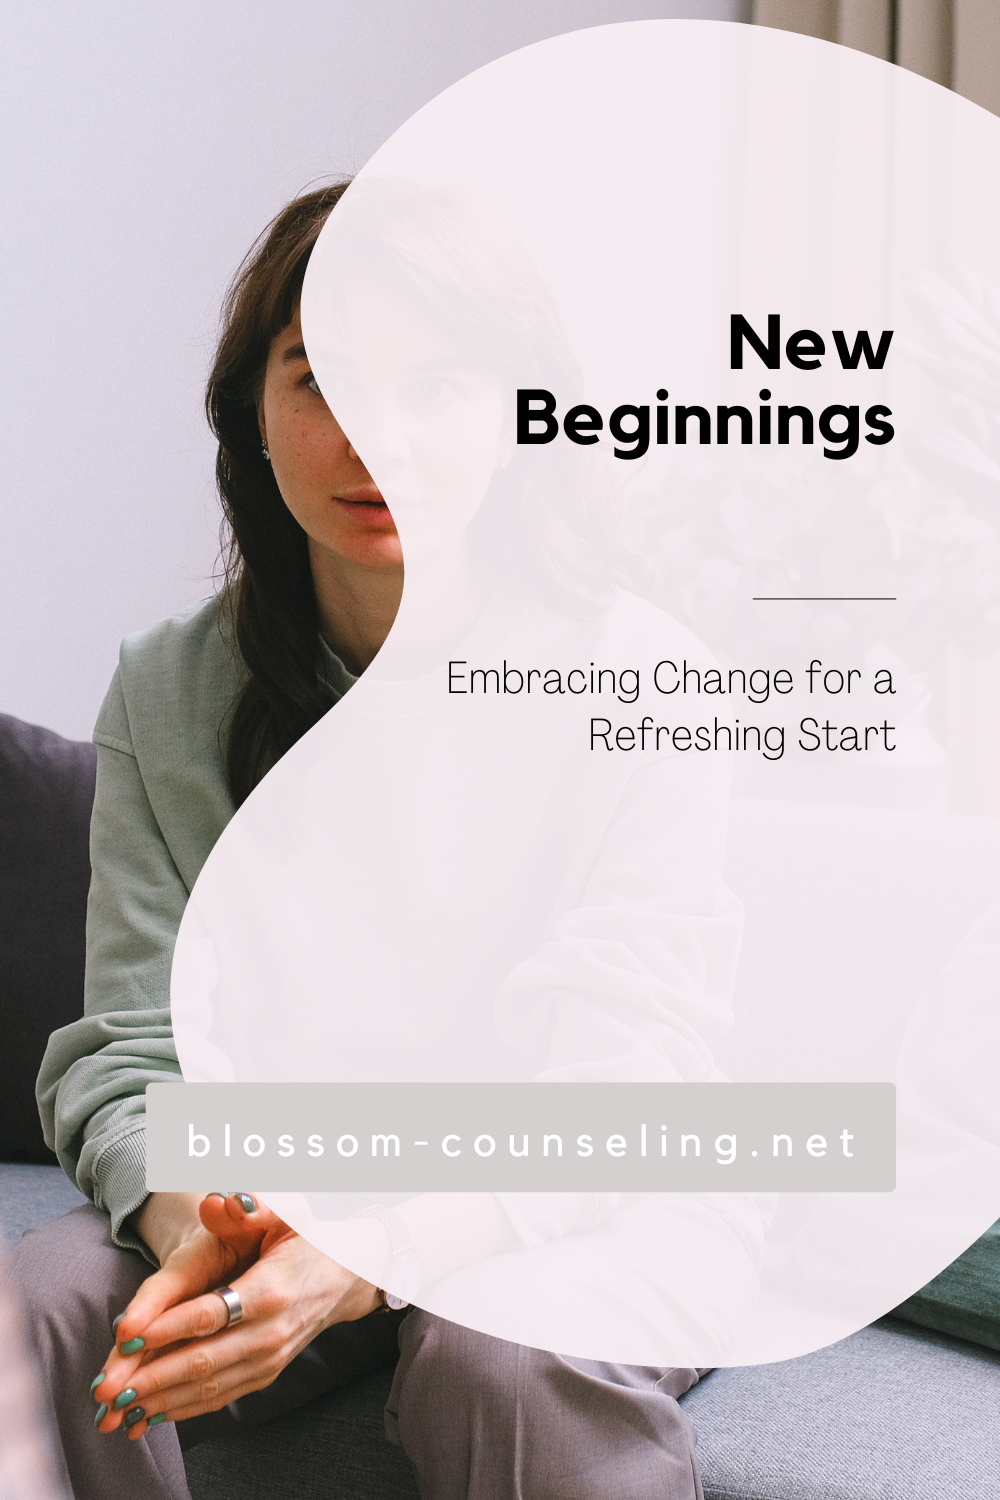 New Beginnings: Embracing Change for a Refreshing Start